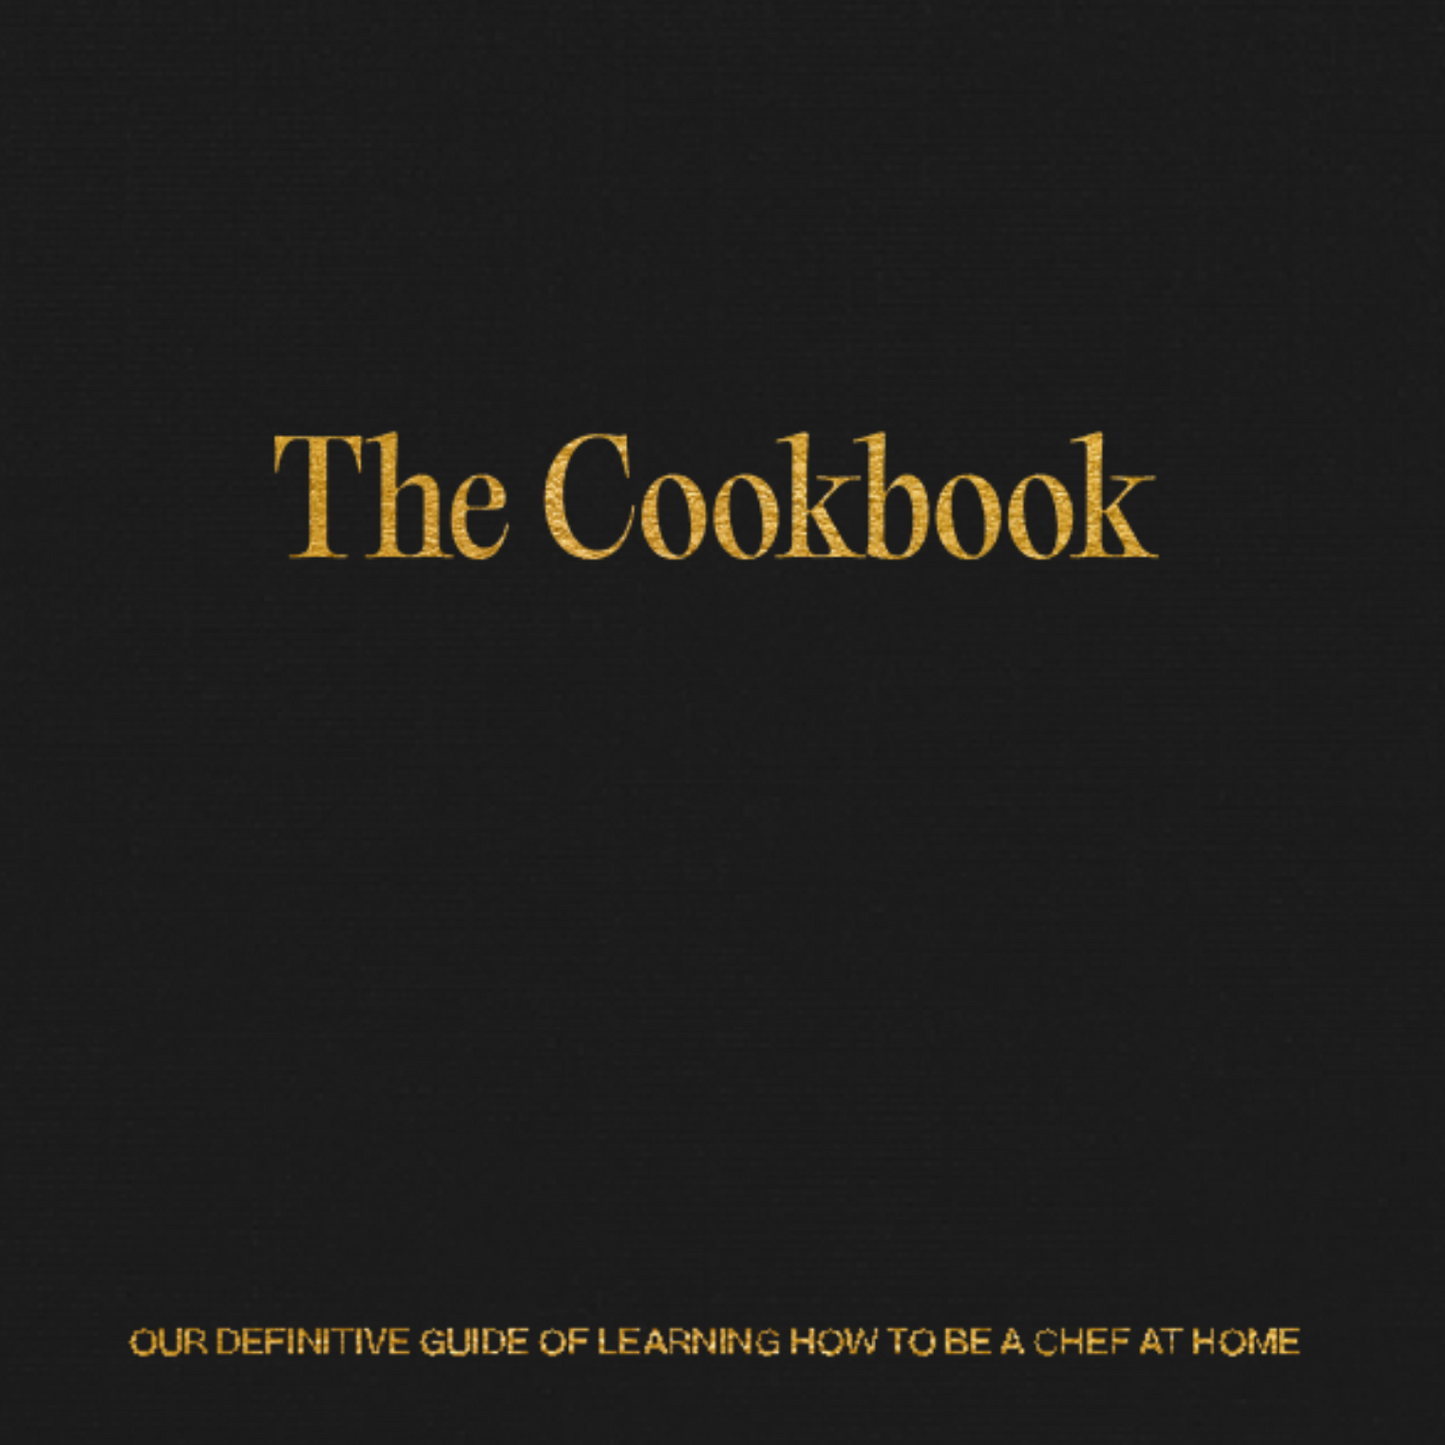 Truffle Shuffle's "The Cookbook" Custom & Signed Limited First Edition Presale